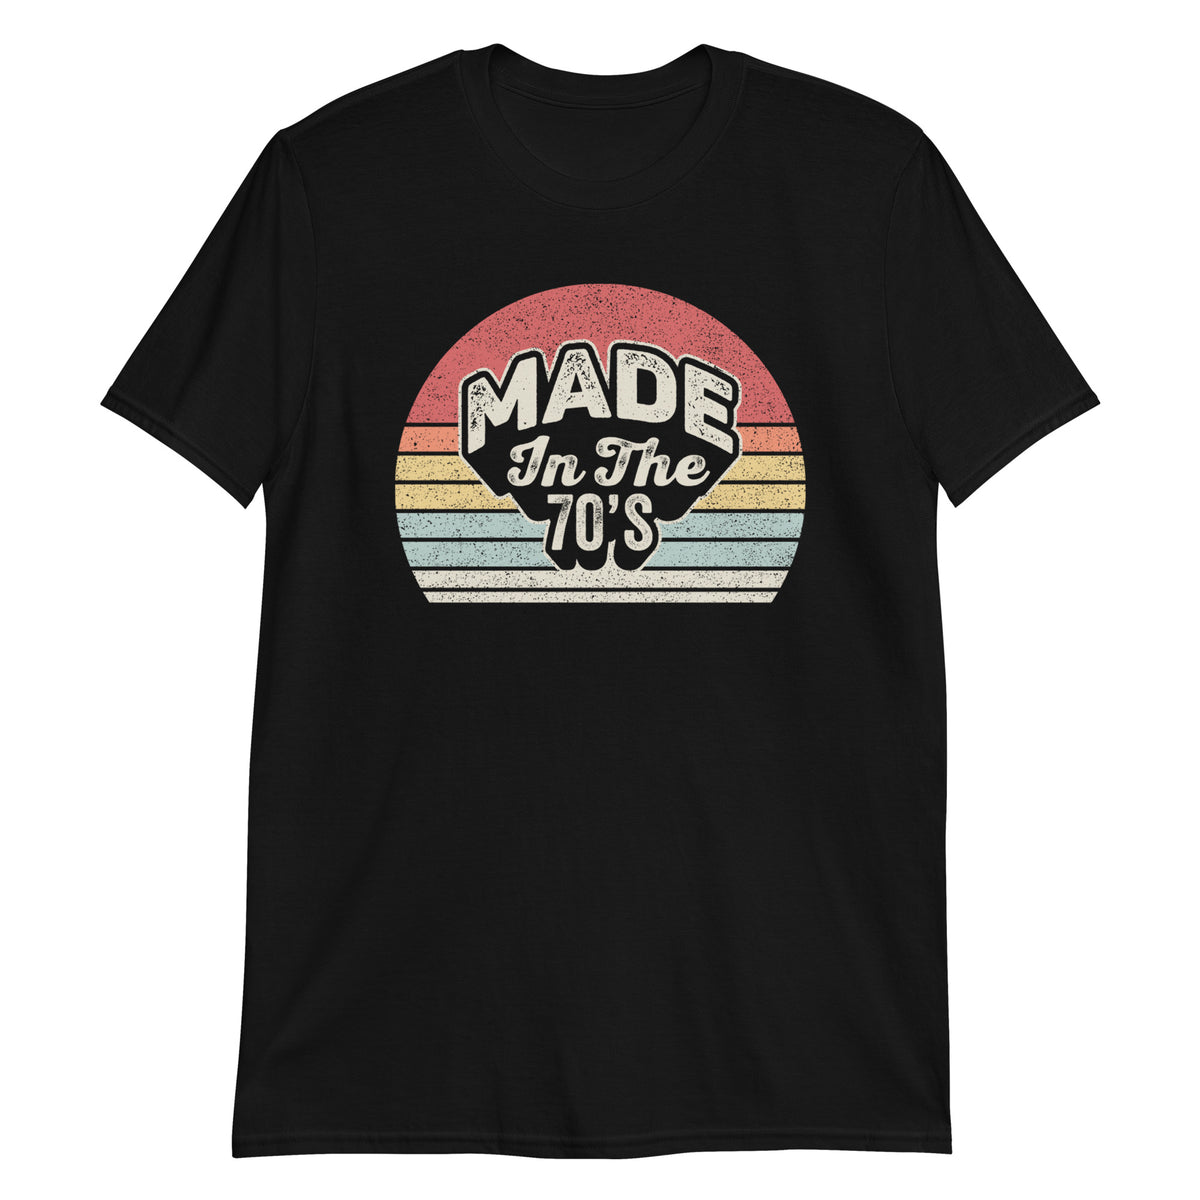 Made in 70s T-Shirt